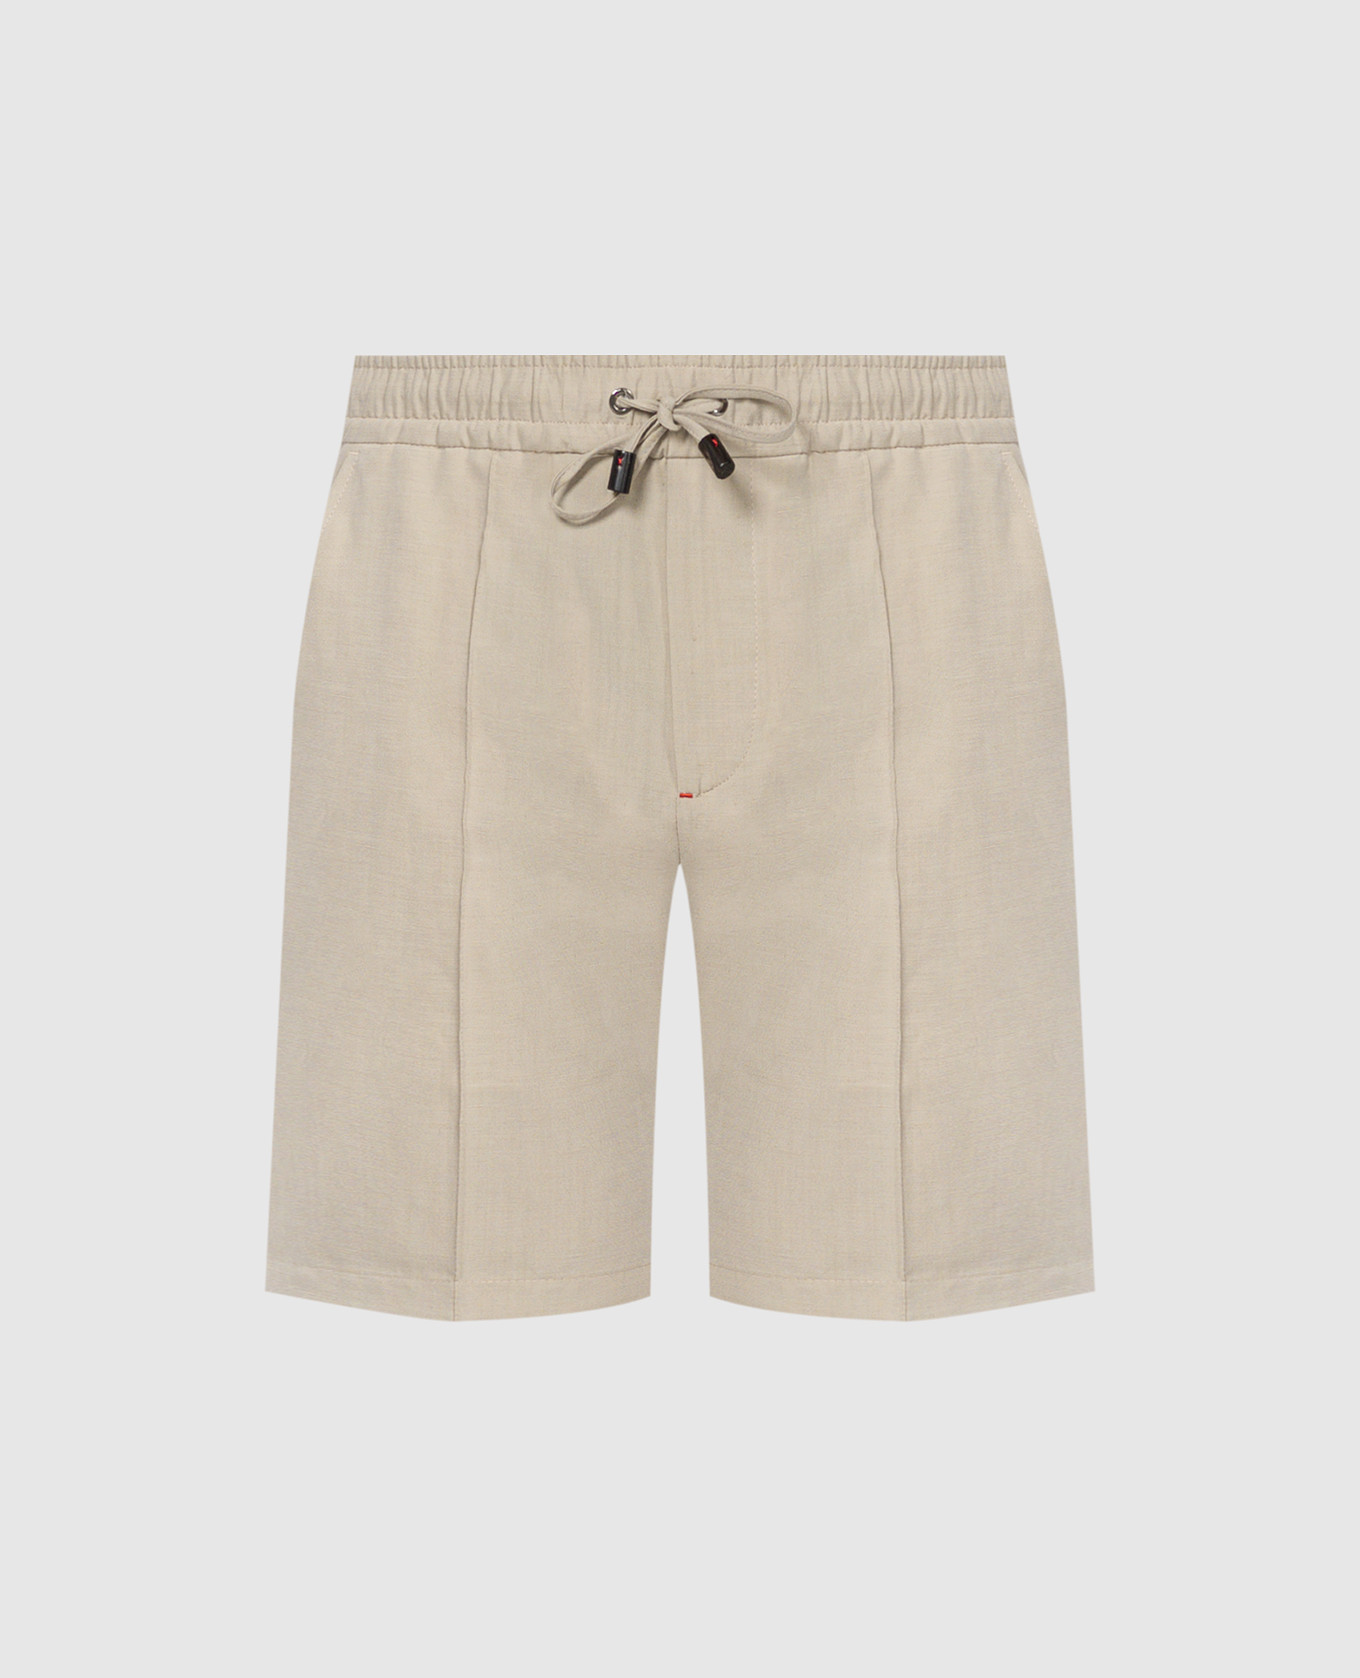 Beige wool and linen shorts with embroidered logo